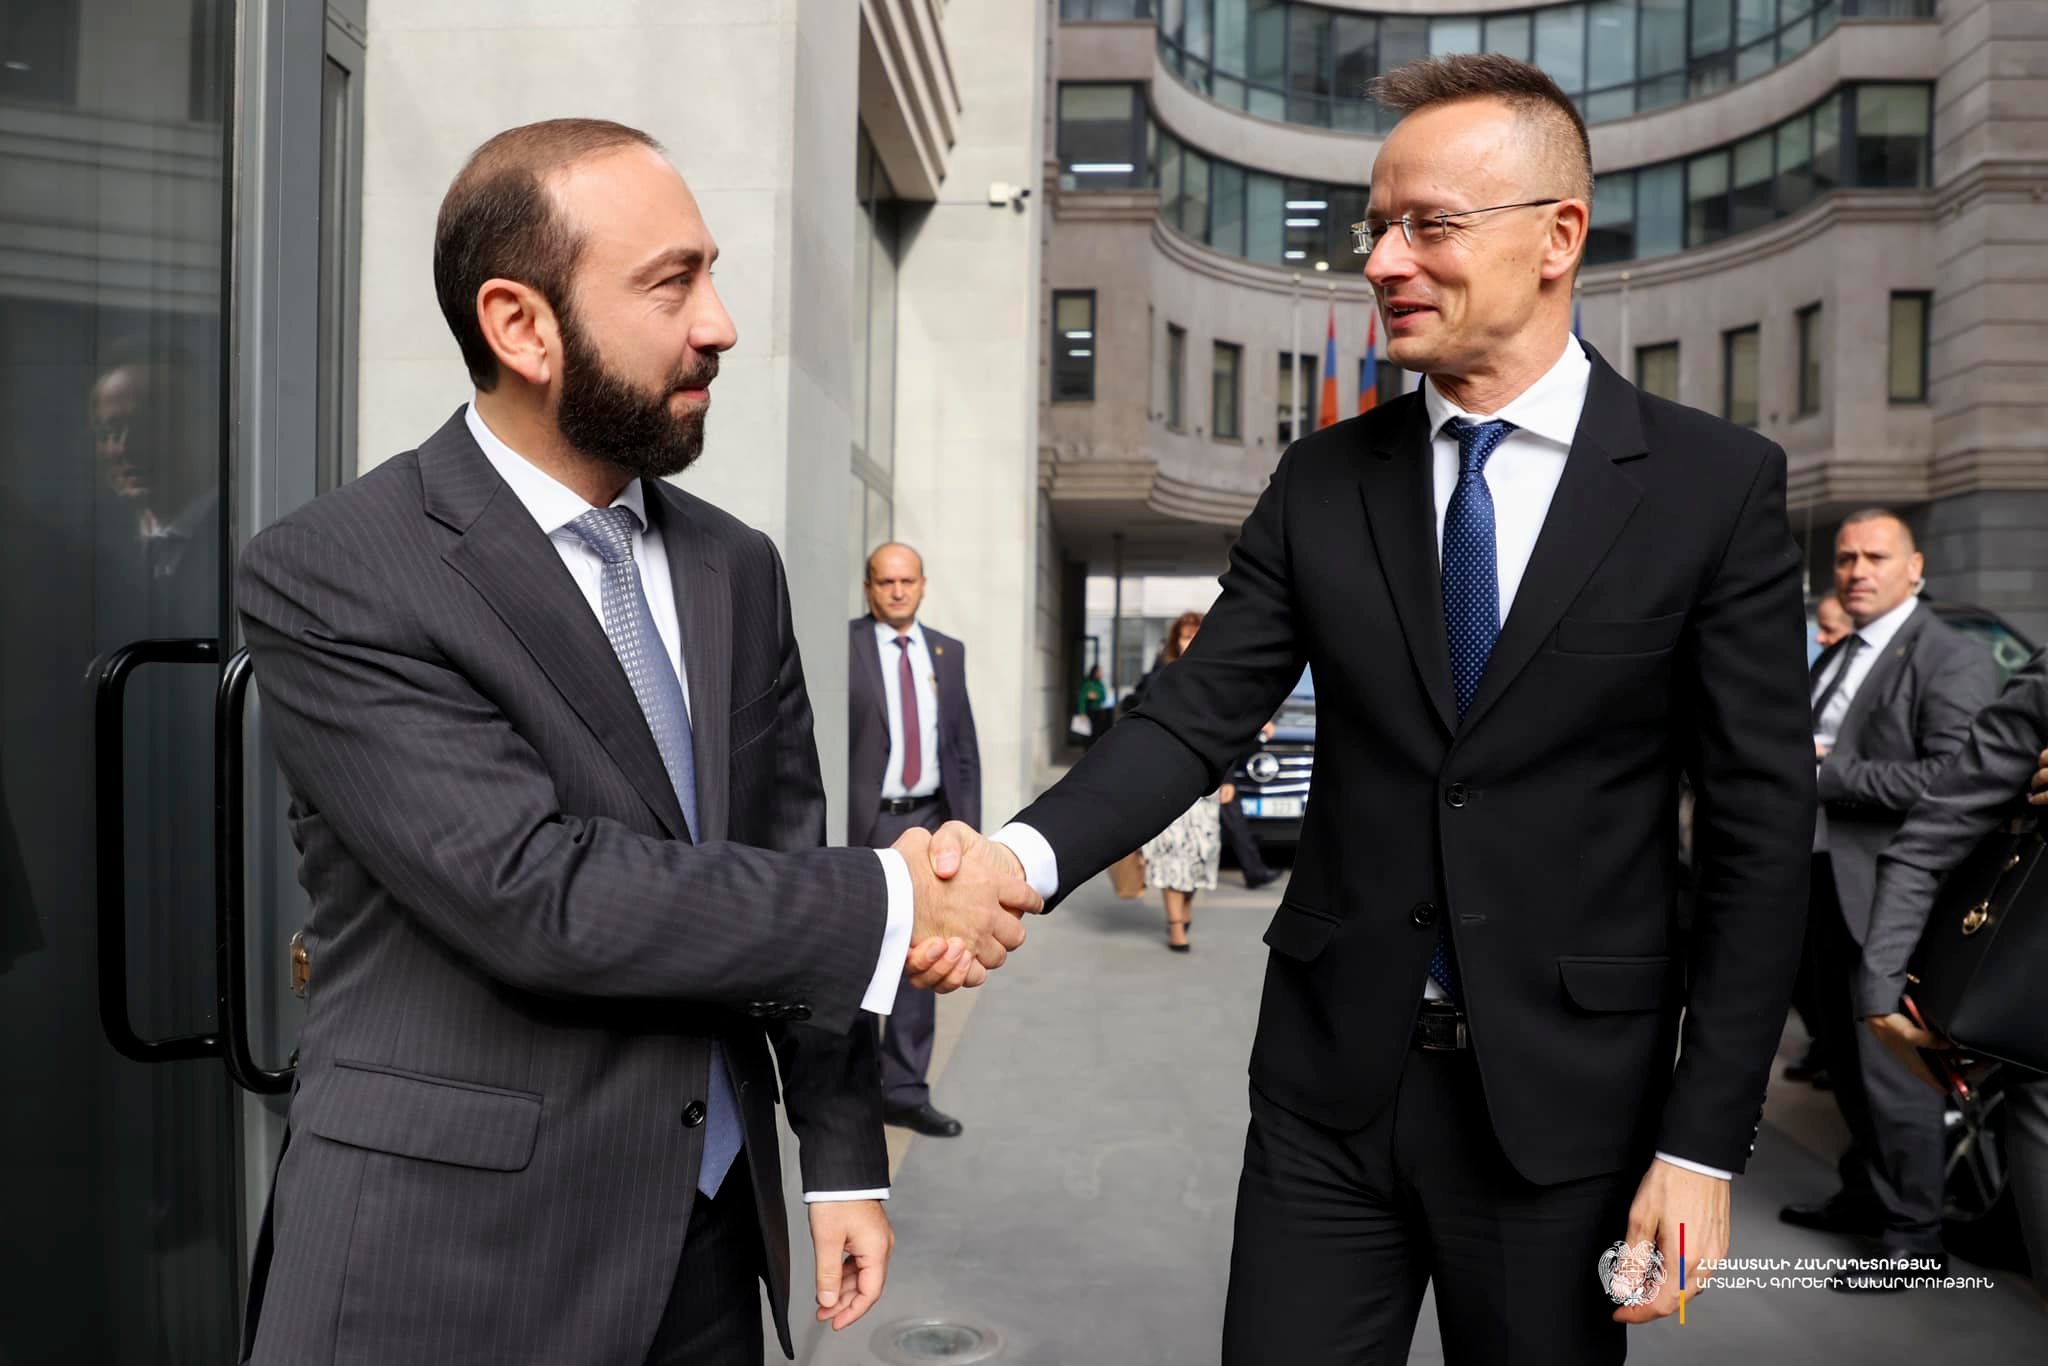 Minister of Foreign Affairs and Trade of Hungary Péter Szijjártó arrived at the Foreign Ministry of Armenia.